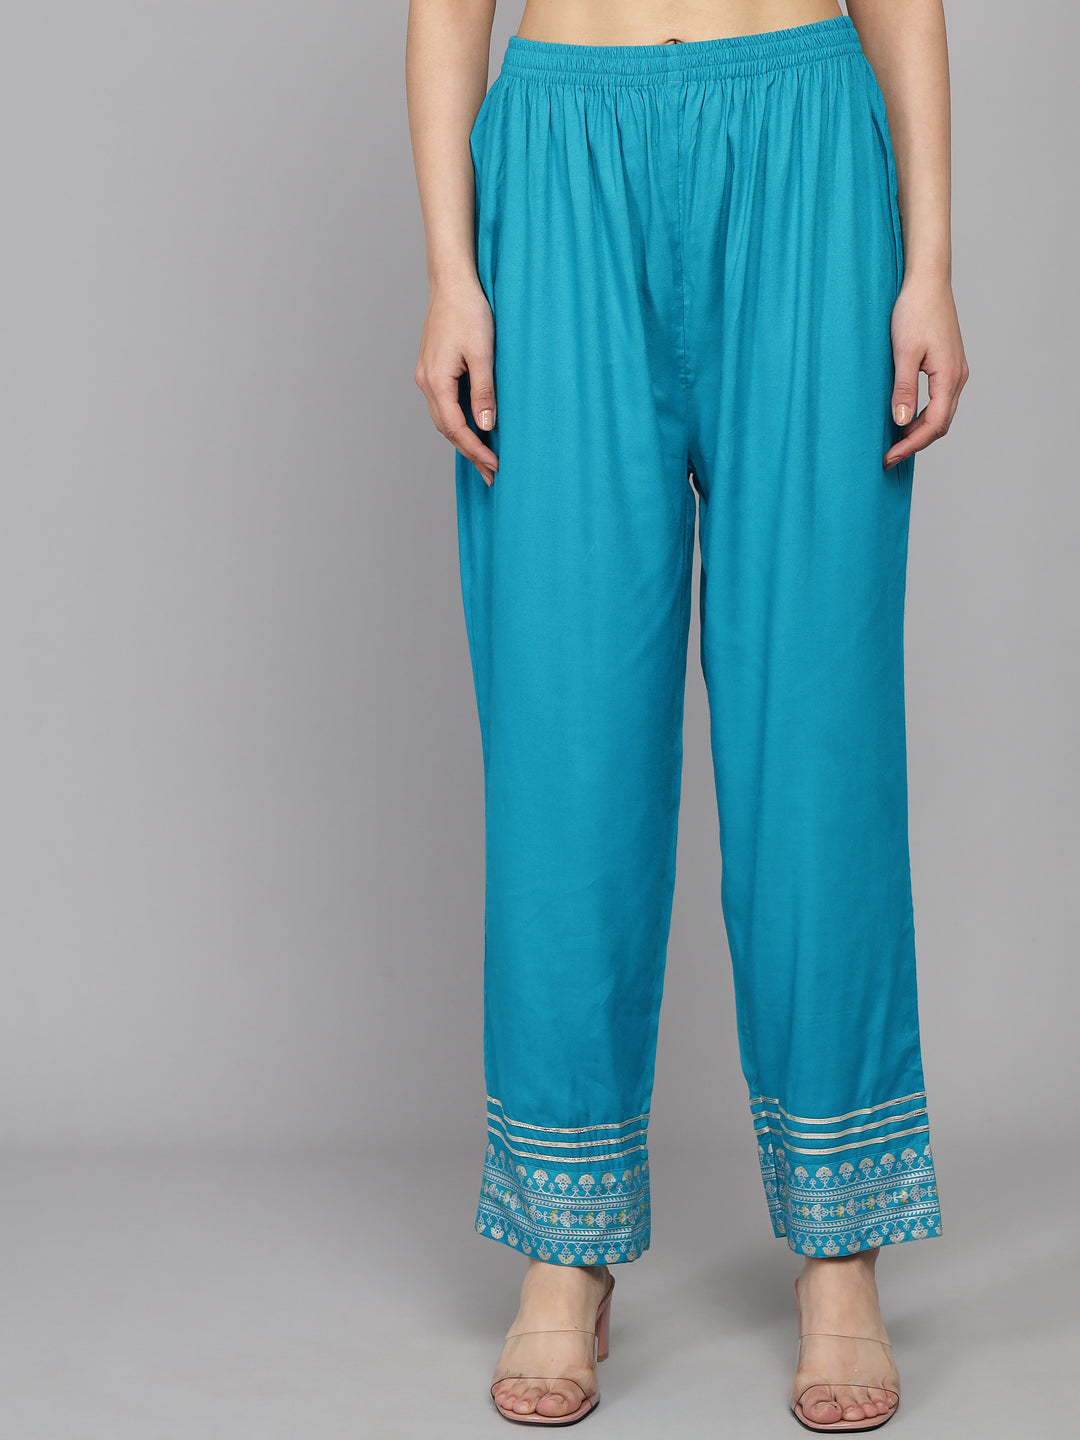 Blue Rayon Kurta With Trousers With Dupatta